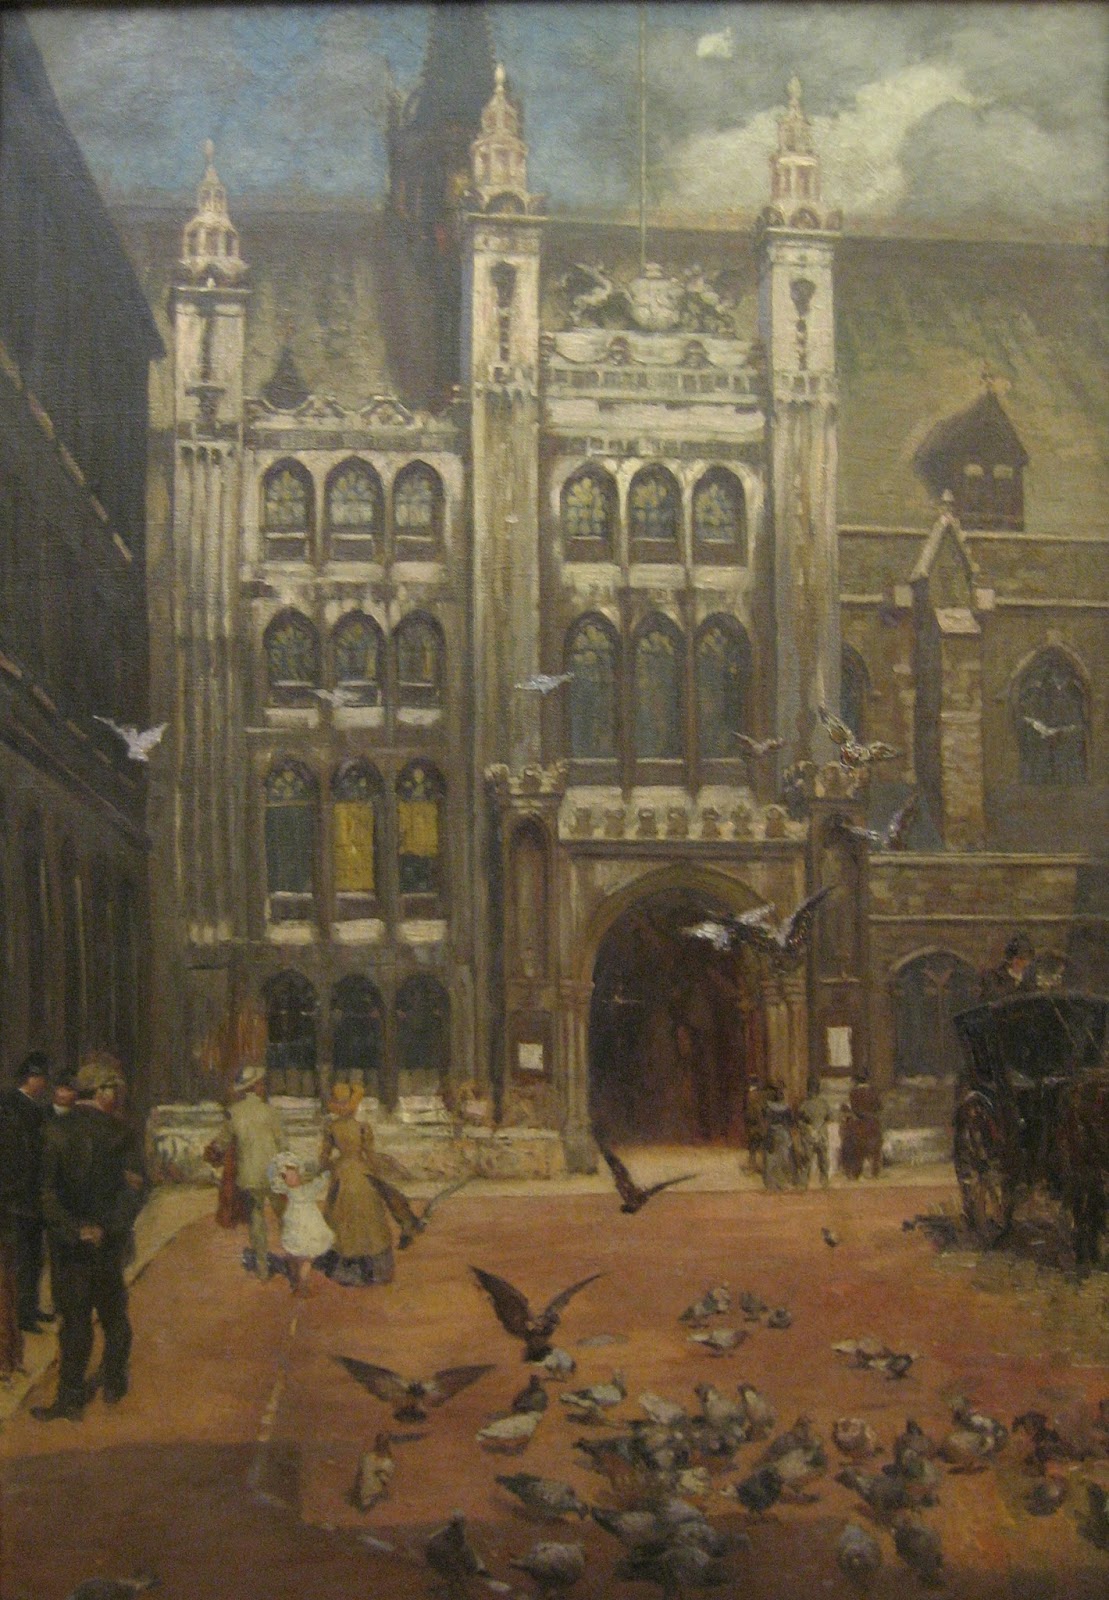 20 Years From Now: London's Guildhall Art Gallery